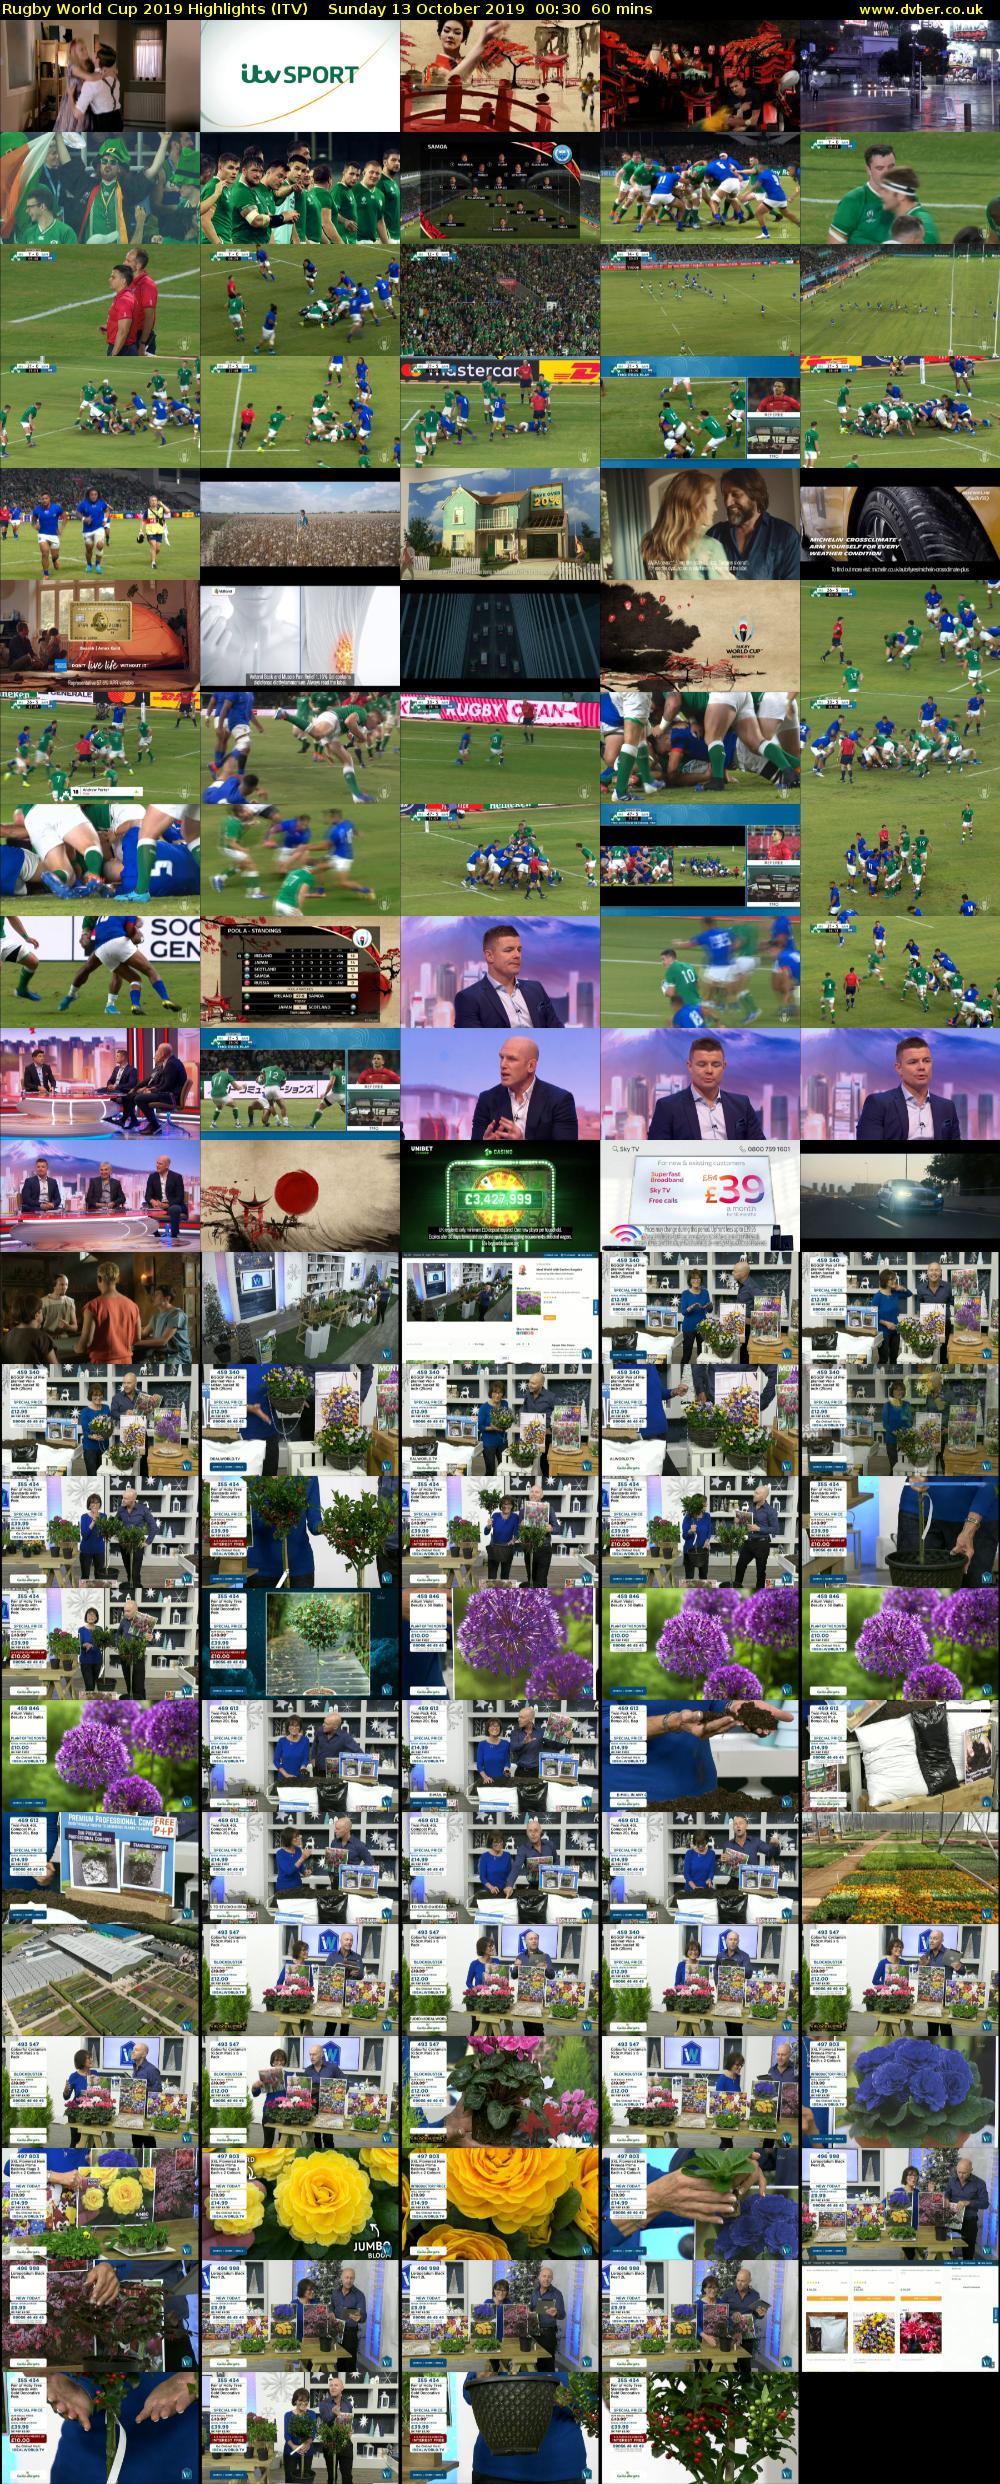 Rugby World Cup 2019 Highlights (ITV) Sunday 13 October 2019 00:30 - 01:30